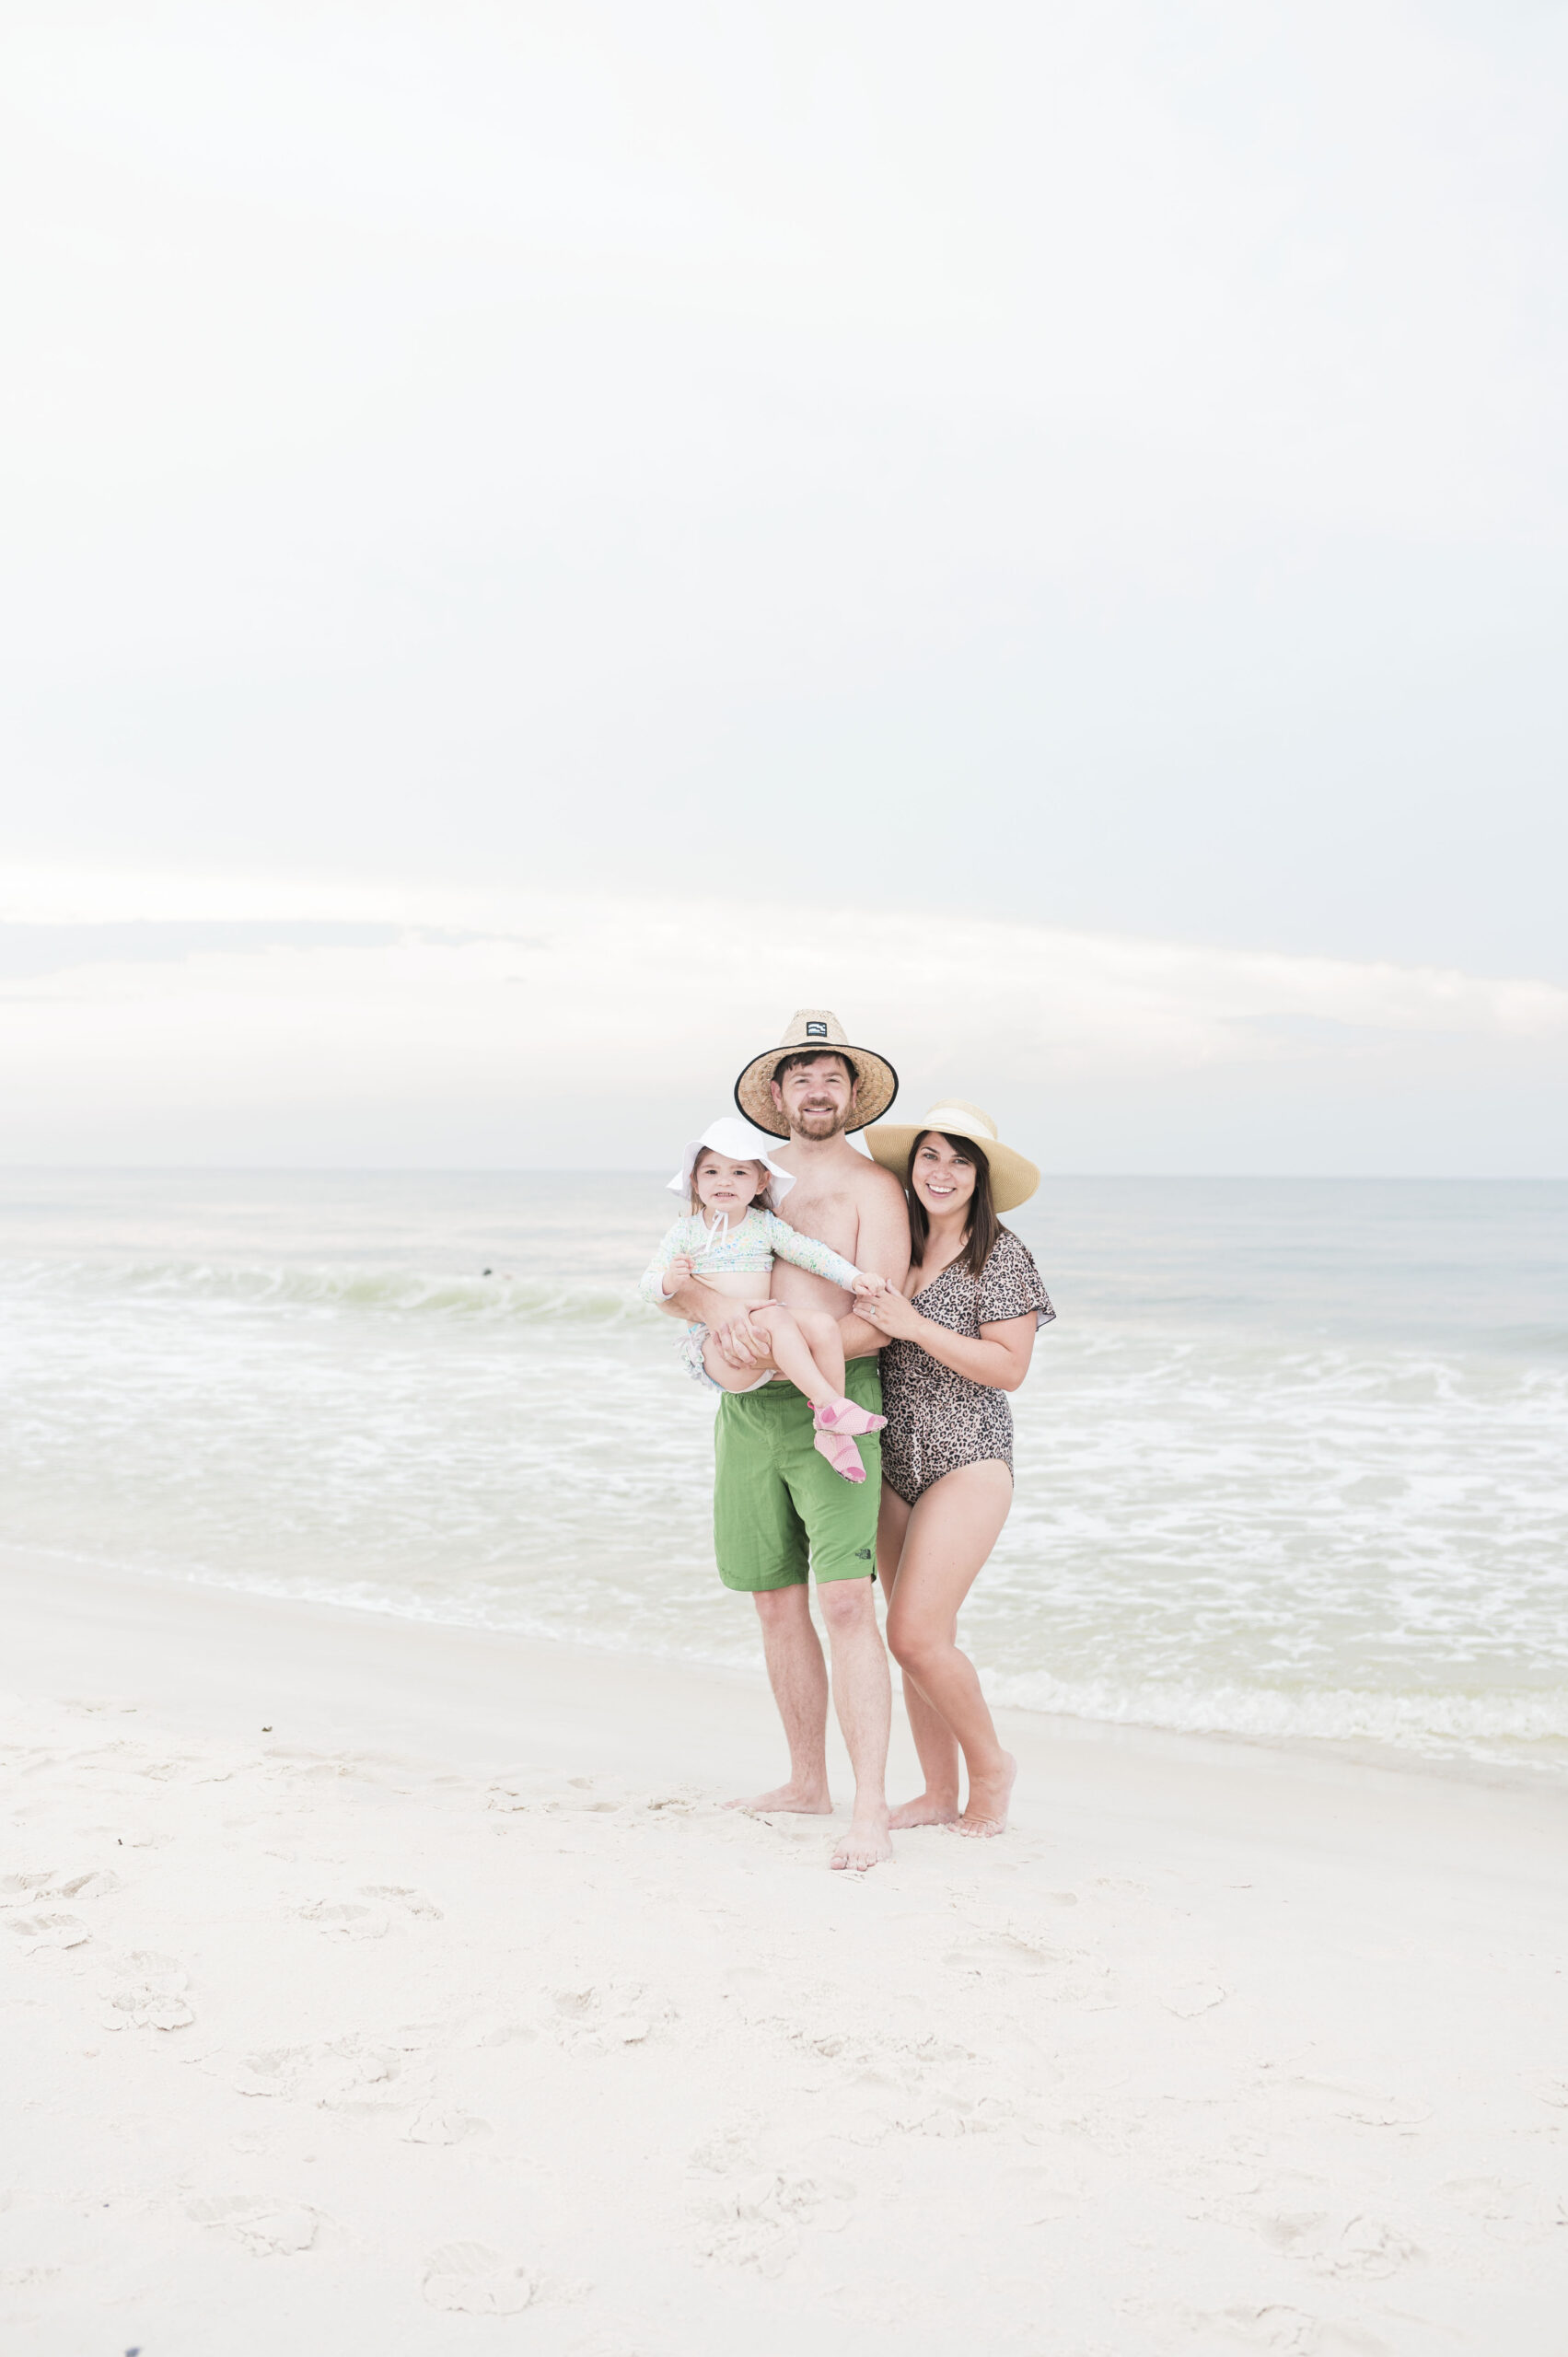 John, Brittney, and Eleanor Naylor standing together in swim suits on the beach in gulf shores, alabama. Traveling on a budget.